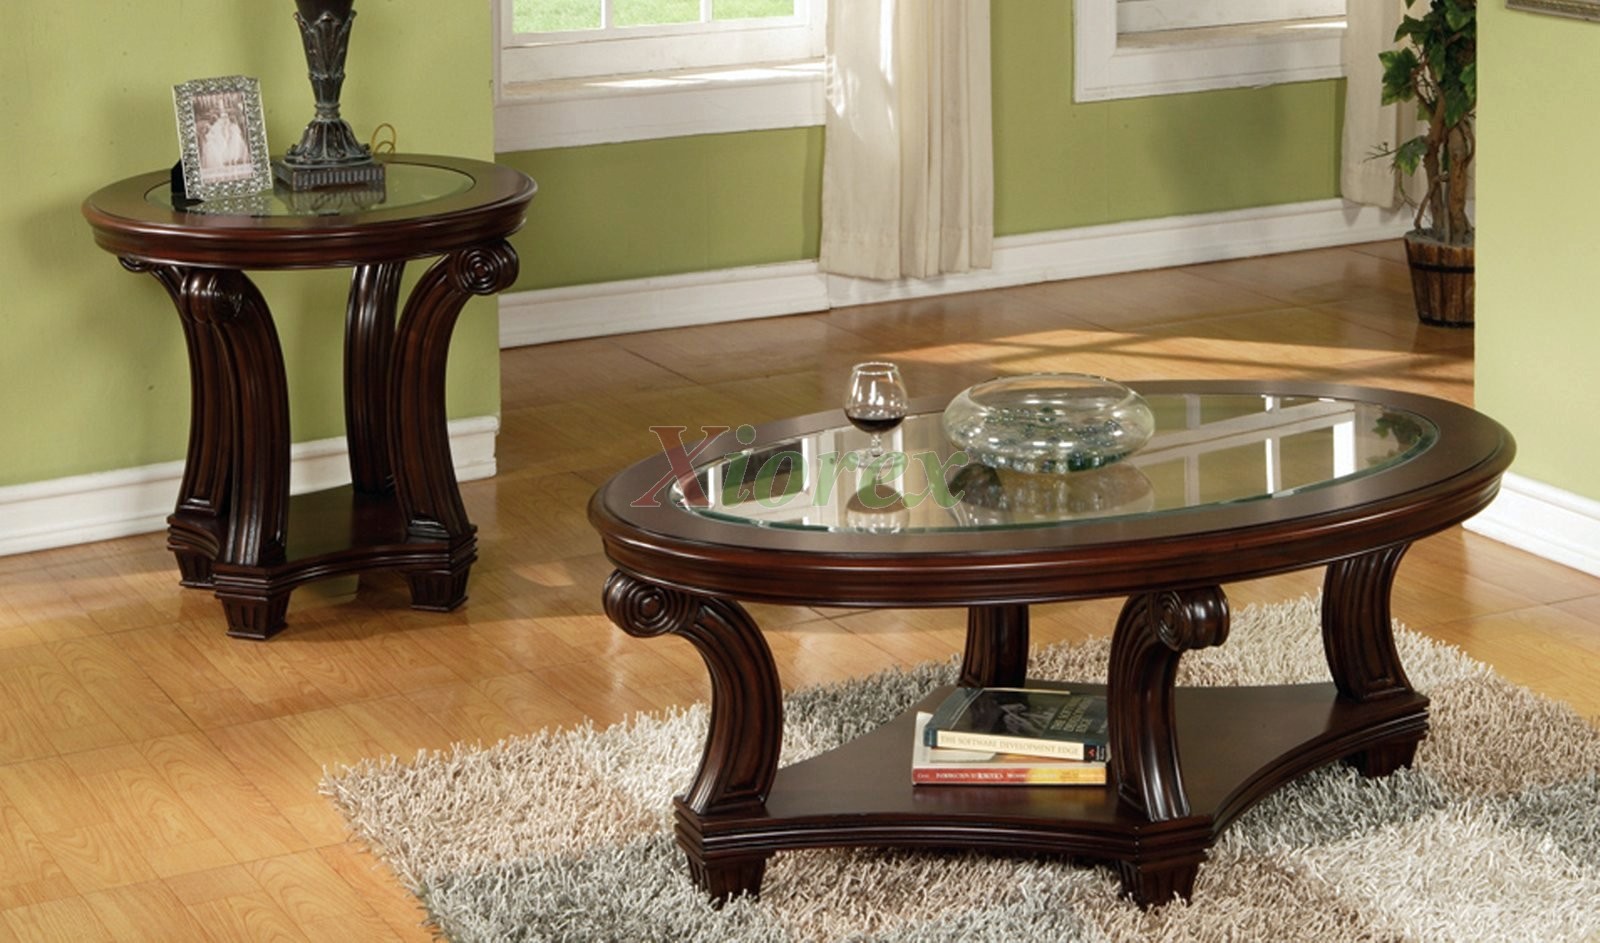 perseus glass top wooden coffee table set montreal xiorex end tables diy base antique sagamore dining off coupon moving threshold accent kids ashley furniture couch warranty